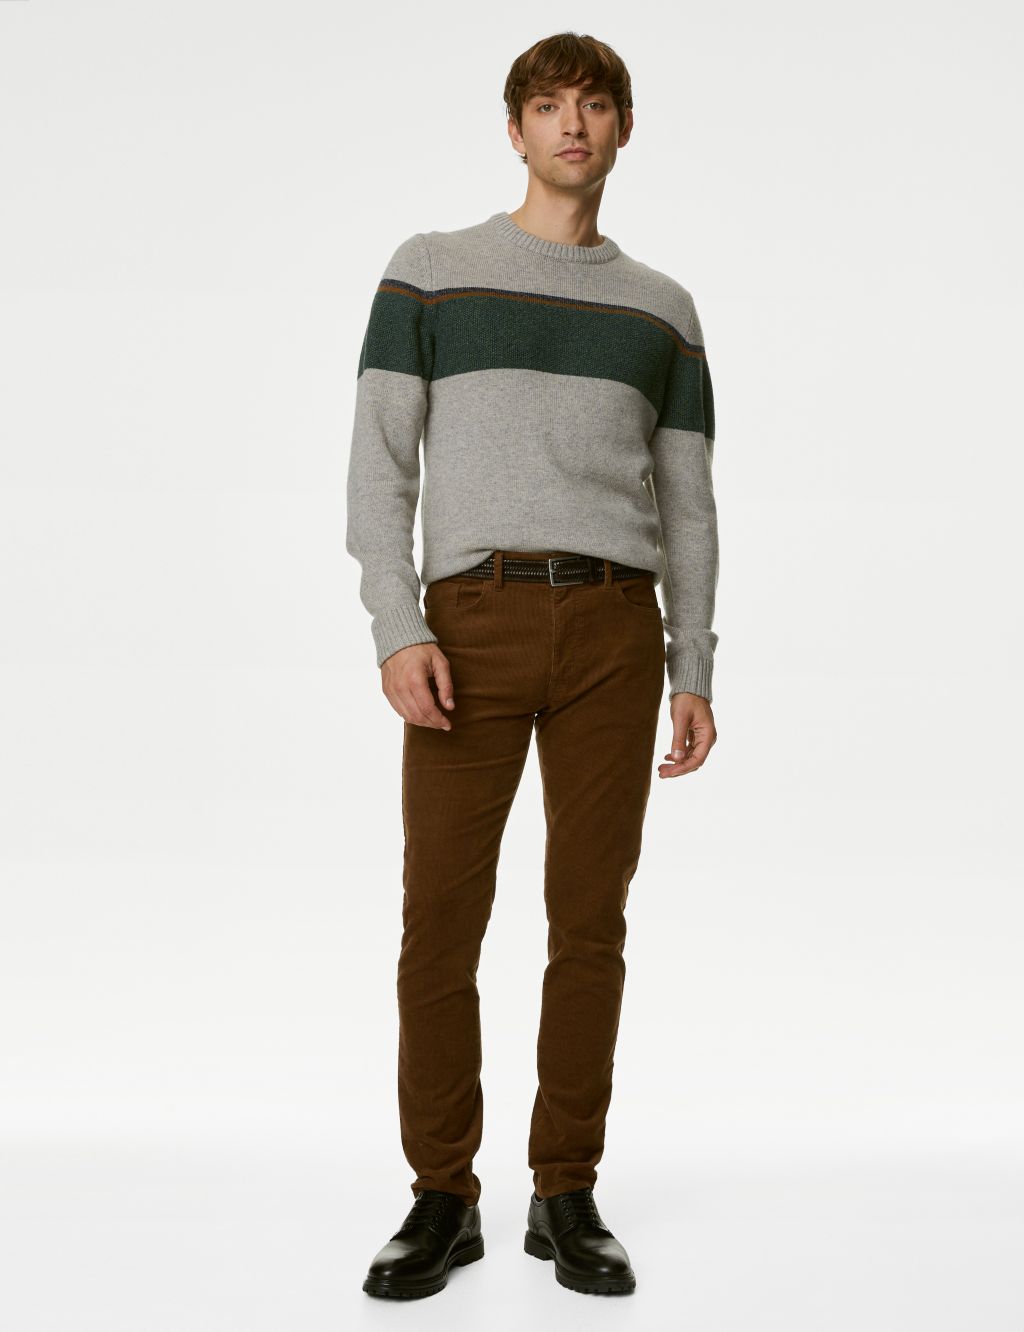 Lambswool Blend Striped Crew Neck Jumper image 3